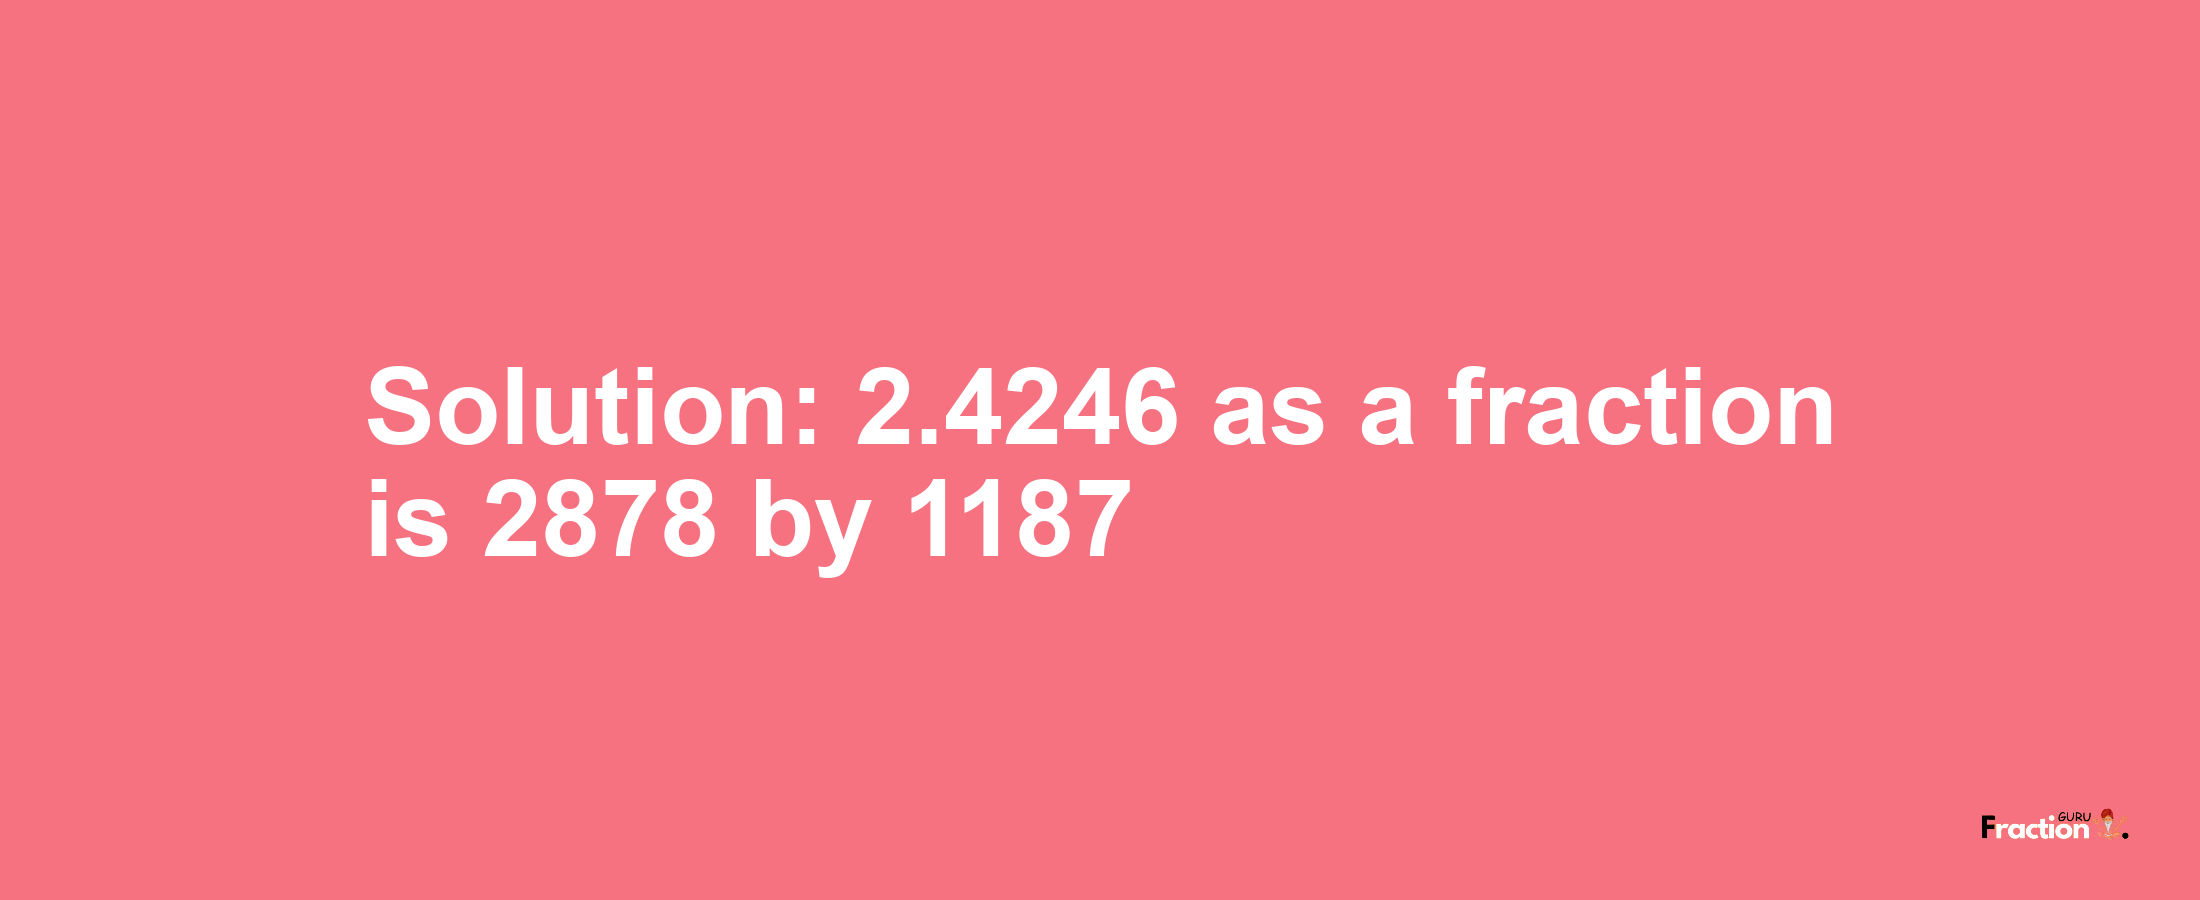 Solution:2.4246 as a fraction is 2878/1187